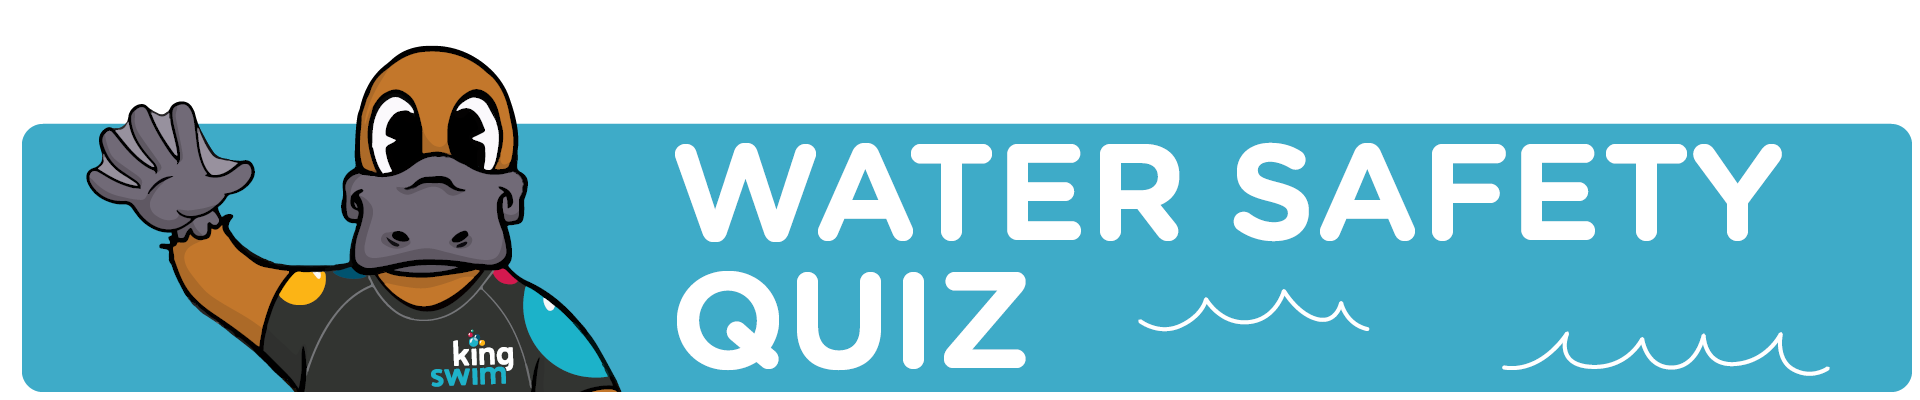 Water safety quiz banner heading artwork with Kingsley the Playtpus waving